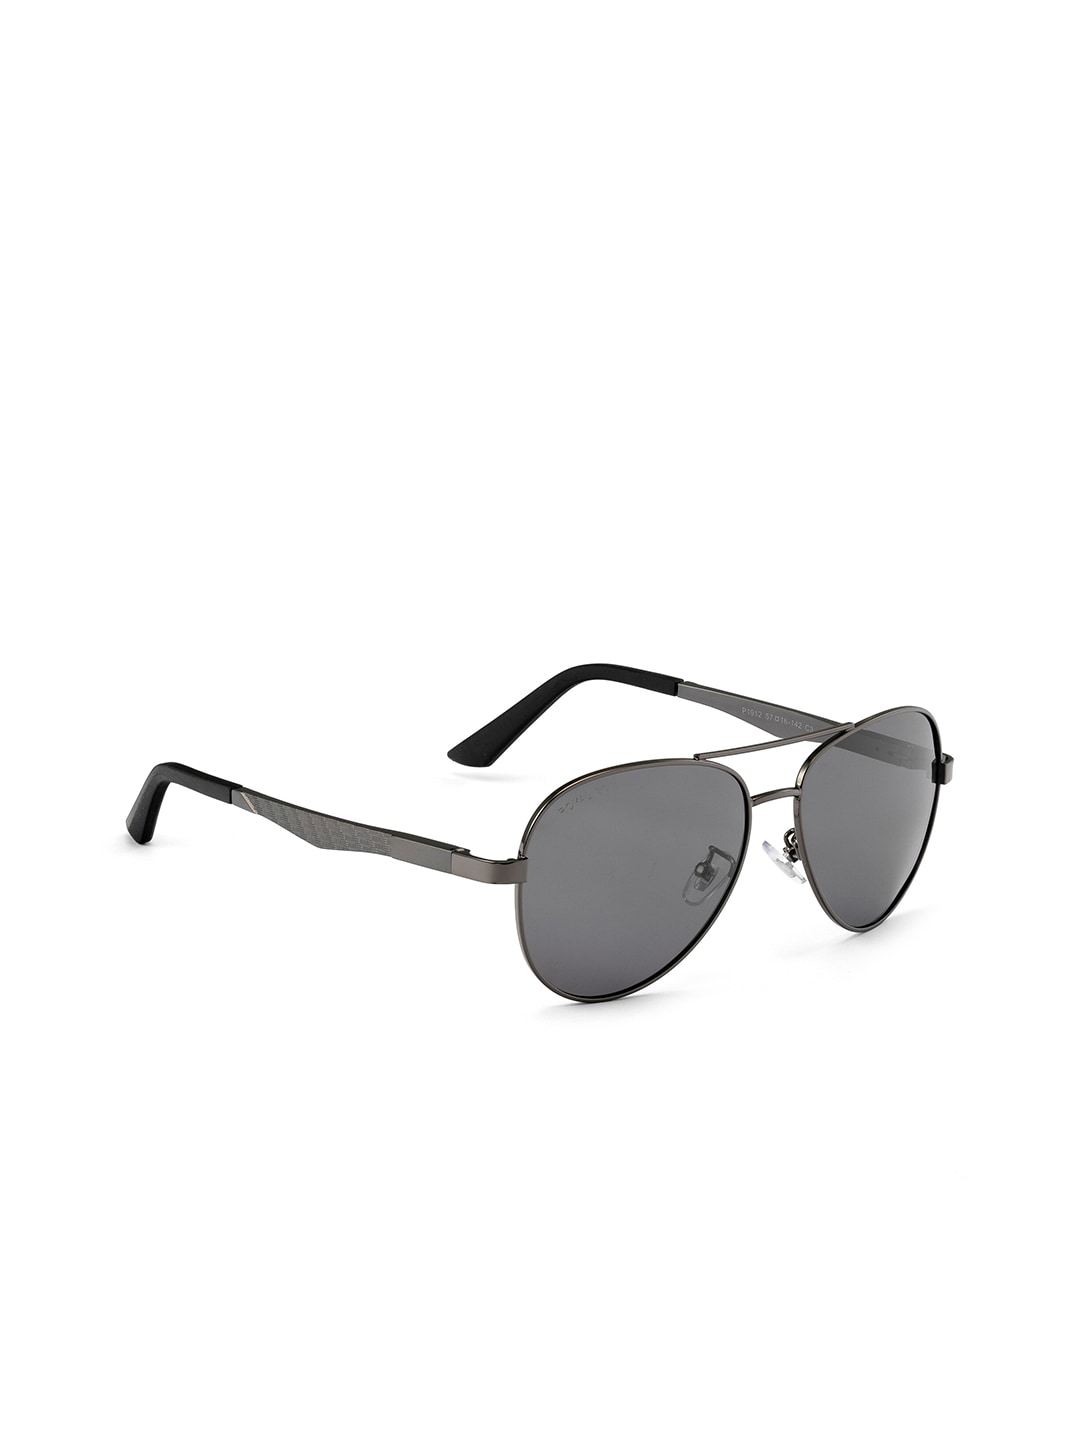 ROYAL SON Aviator Sunglasses with Polarised and UV Protected Lens CHI00128-C2